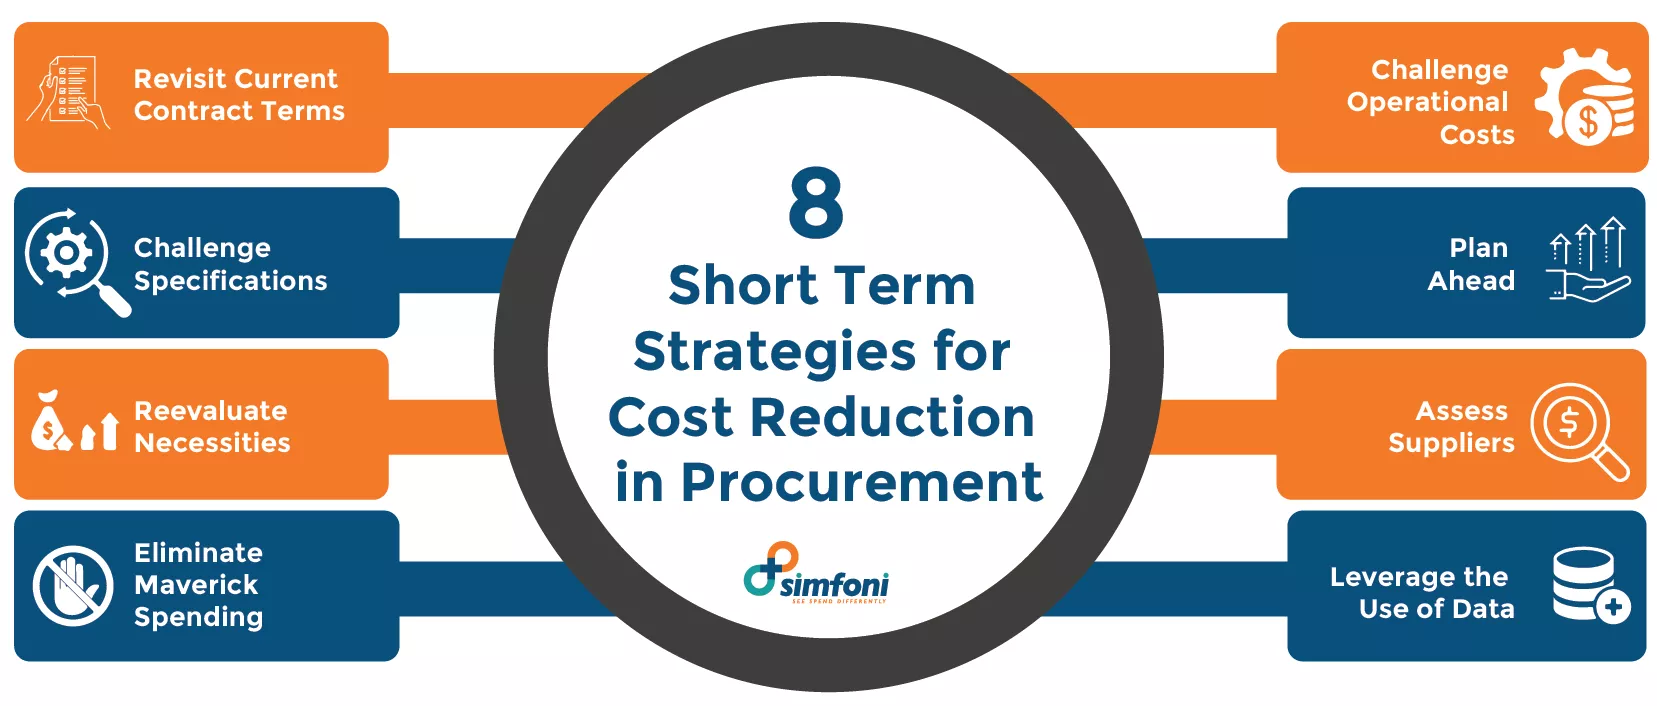 8 Short Term Strategies for Cost Reduction in Procurement